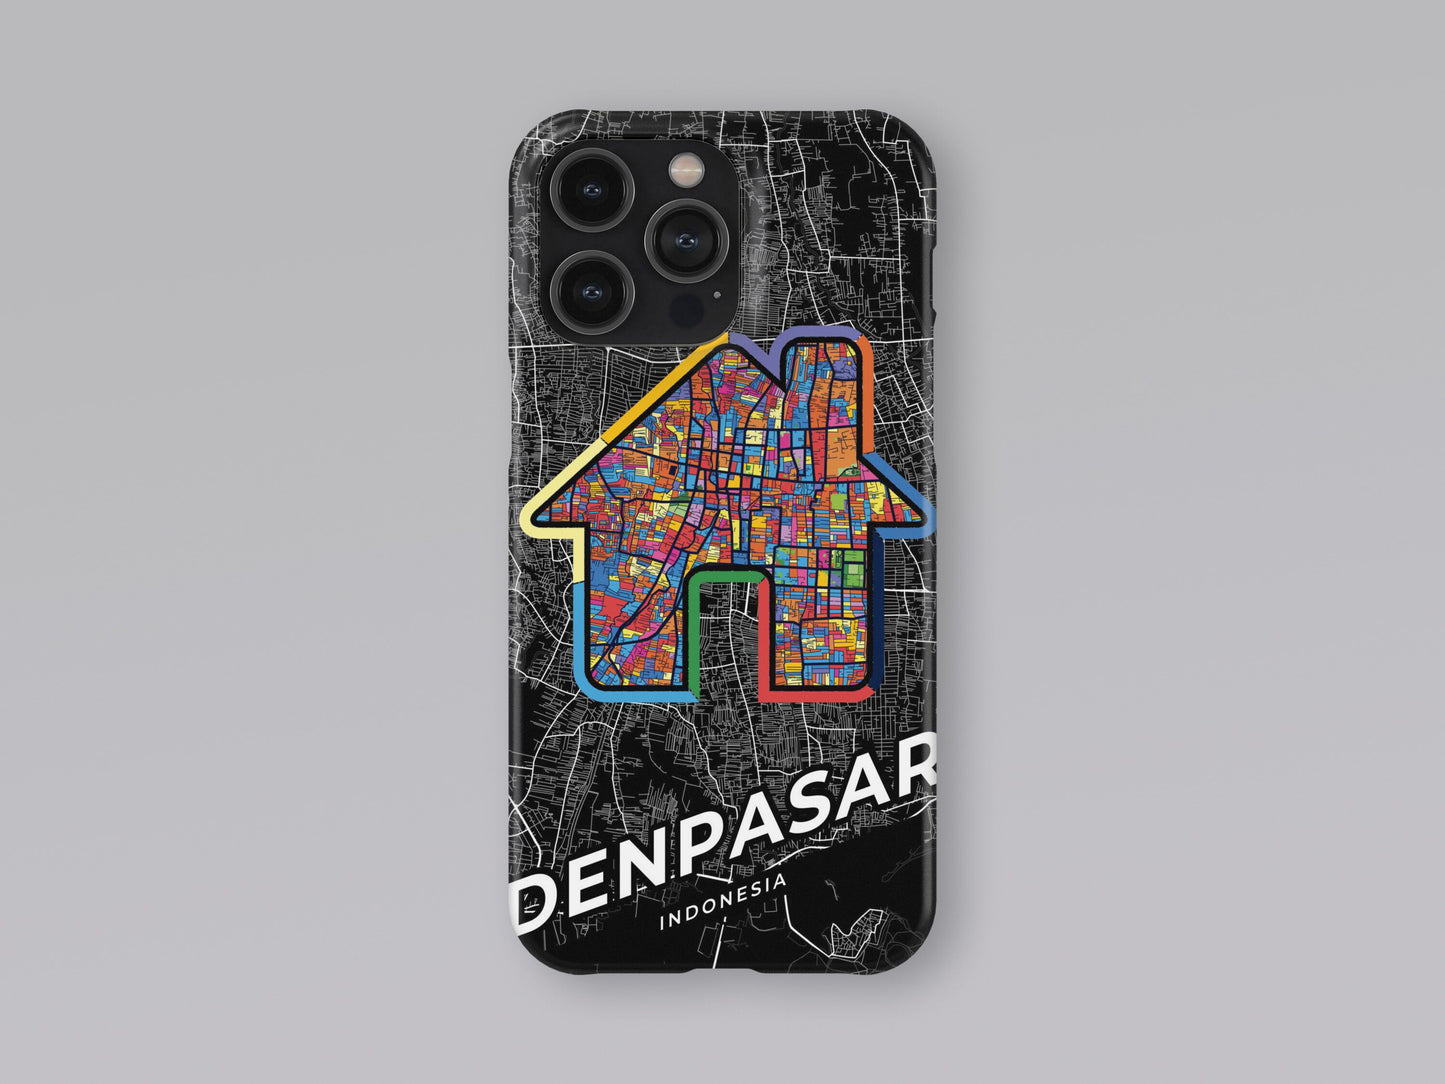 Denpasar Indonesia slim phone case with colorful icon. Birthday, wedding or housewarming gift. Couple match cases. 3